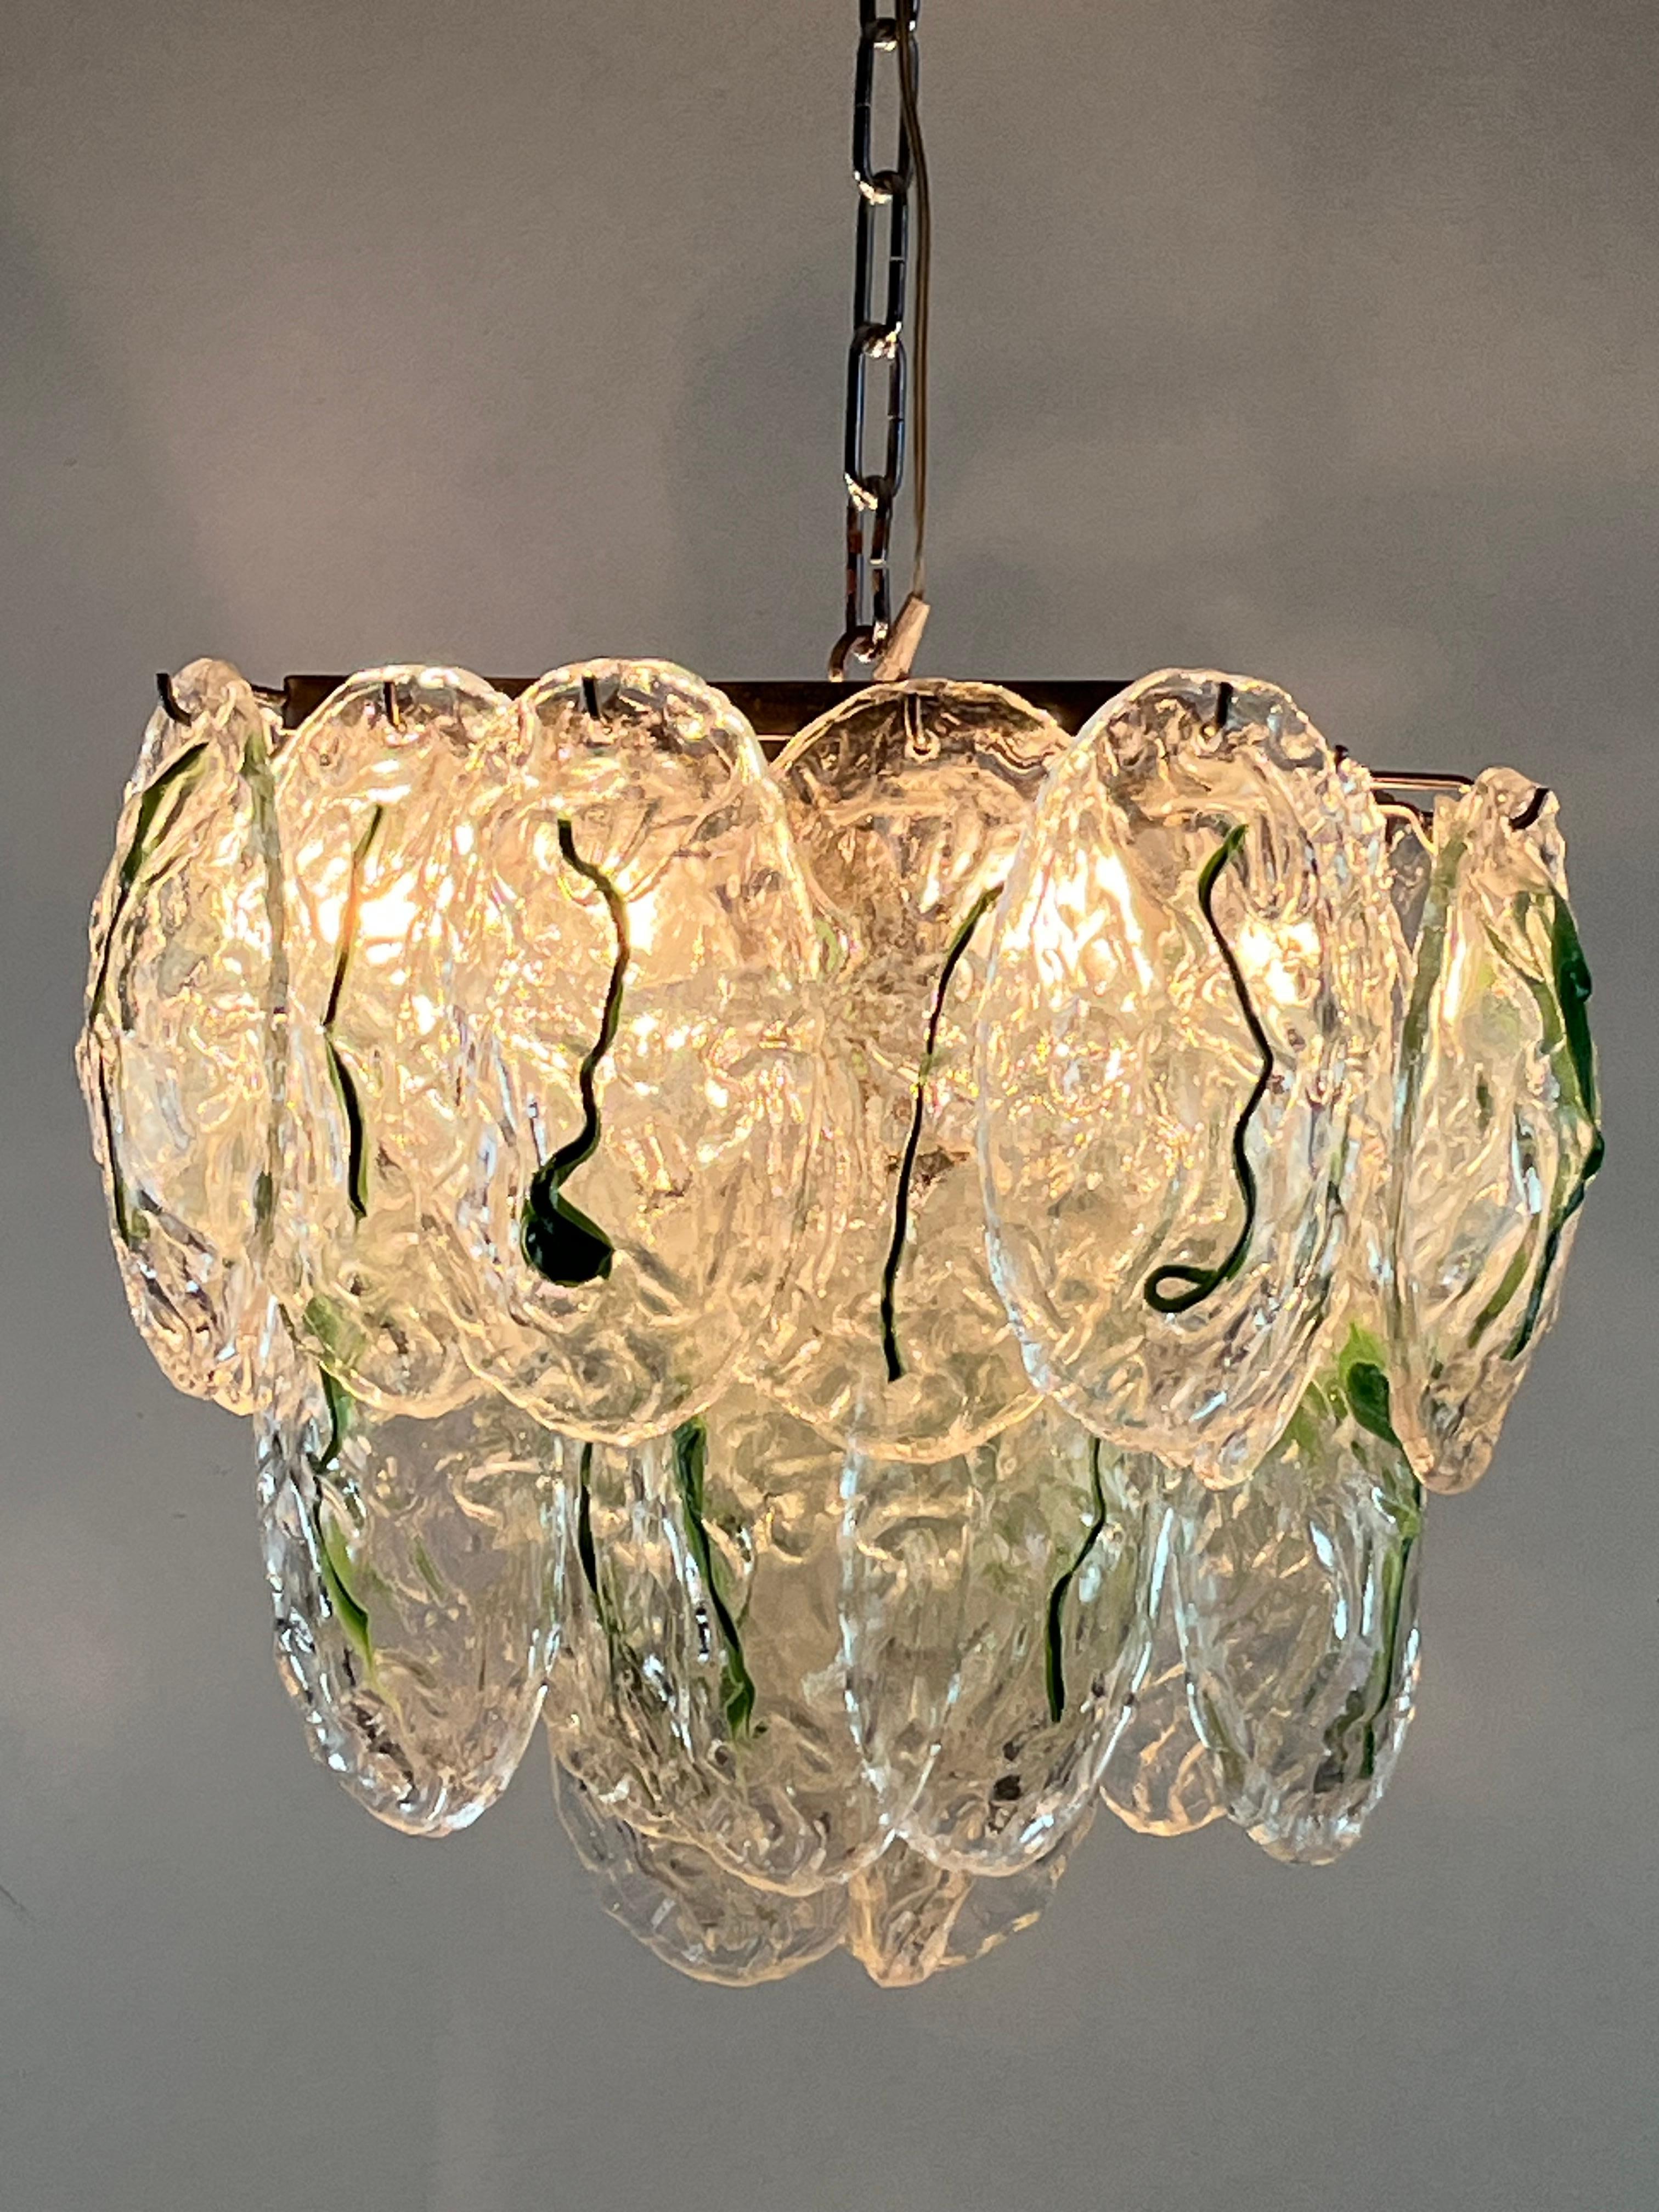 Six-light Murano Glass Chandelier by Vistosi, Italy, 1960s For Sale 7